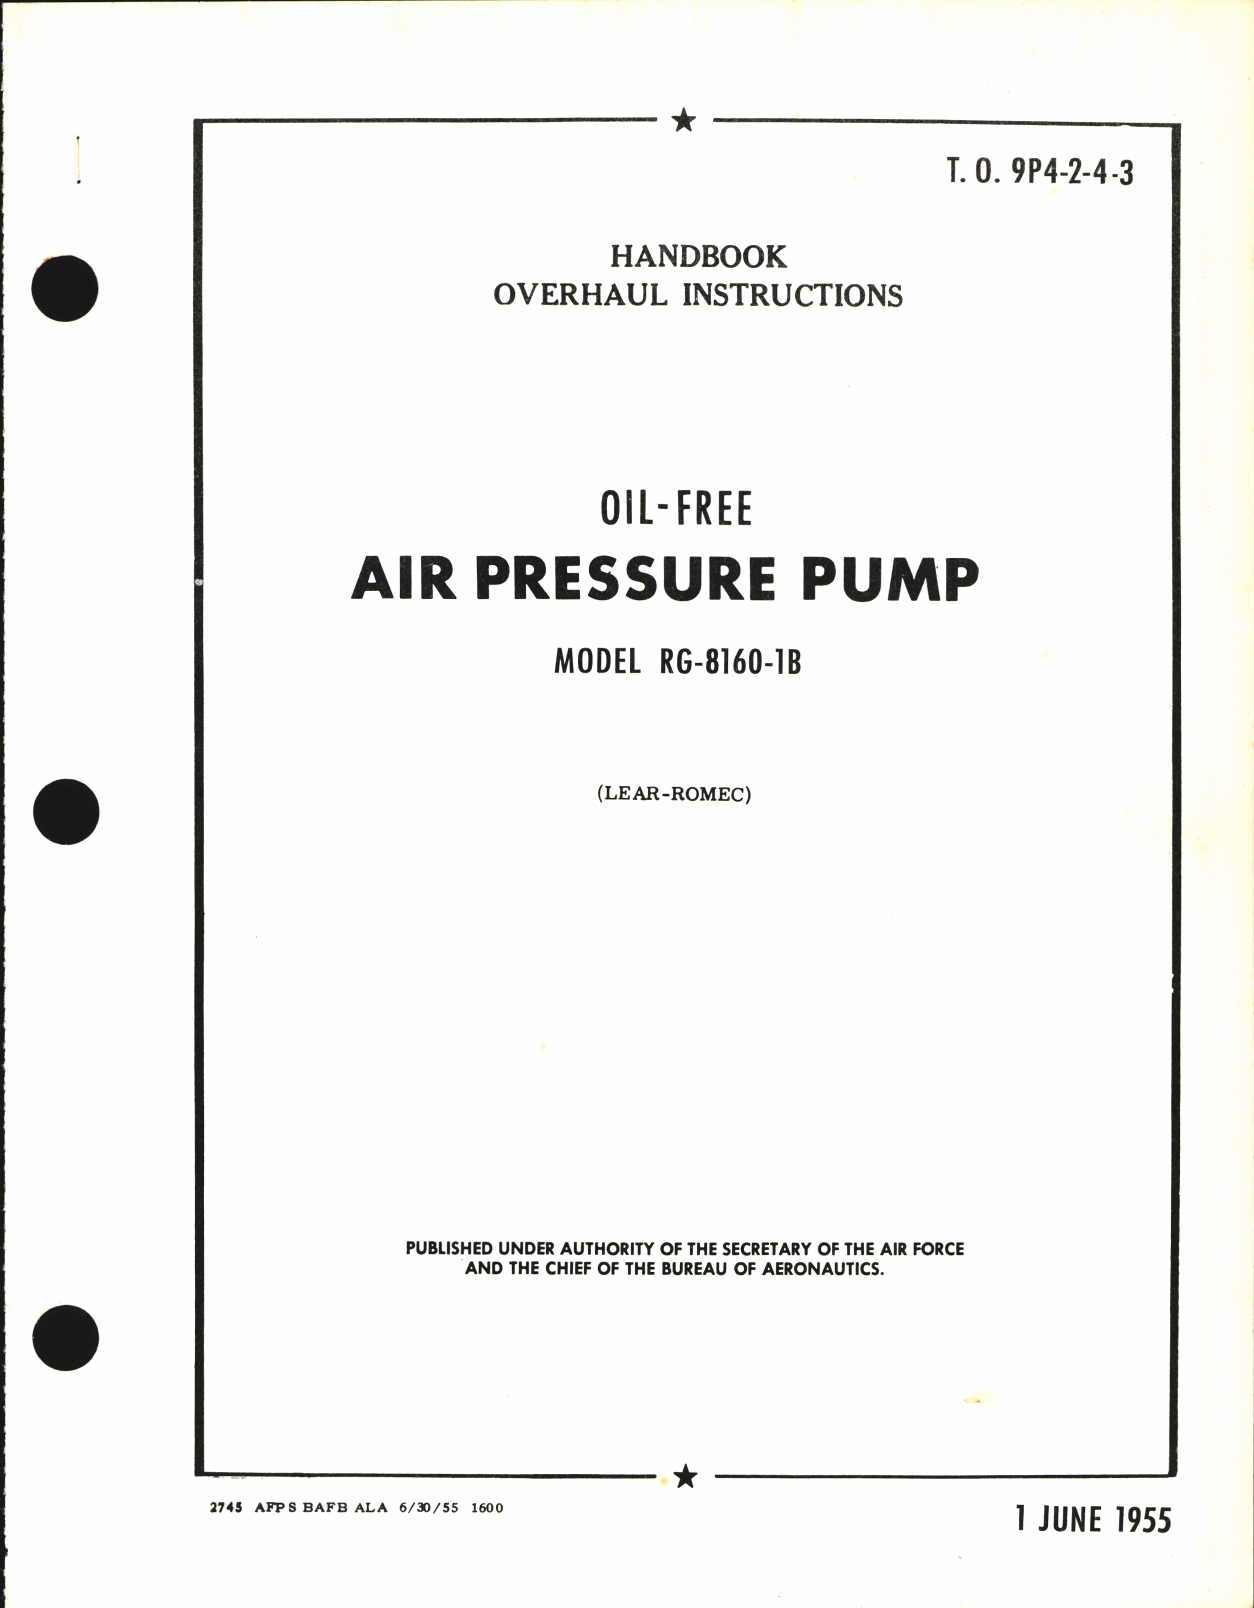 Sample page 1 from AirCorps Library document: Handbook of Overhaul Instructions for Oil-Free Air Pressure Pump Model RG-8160-1B